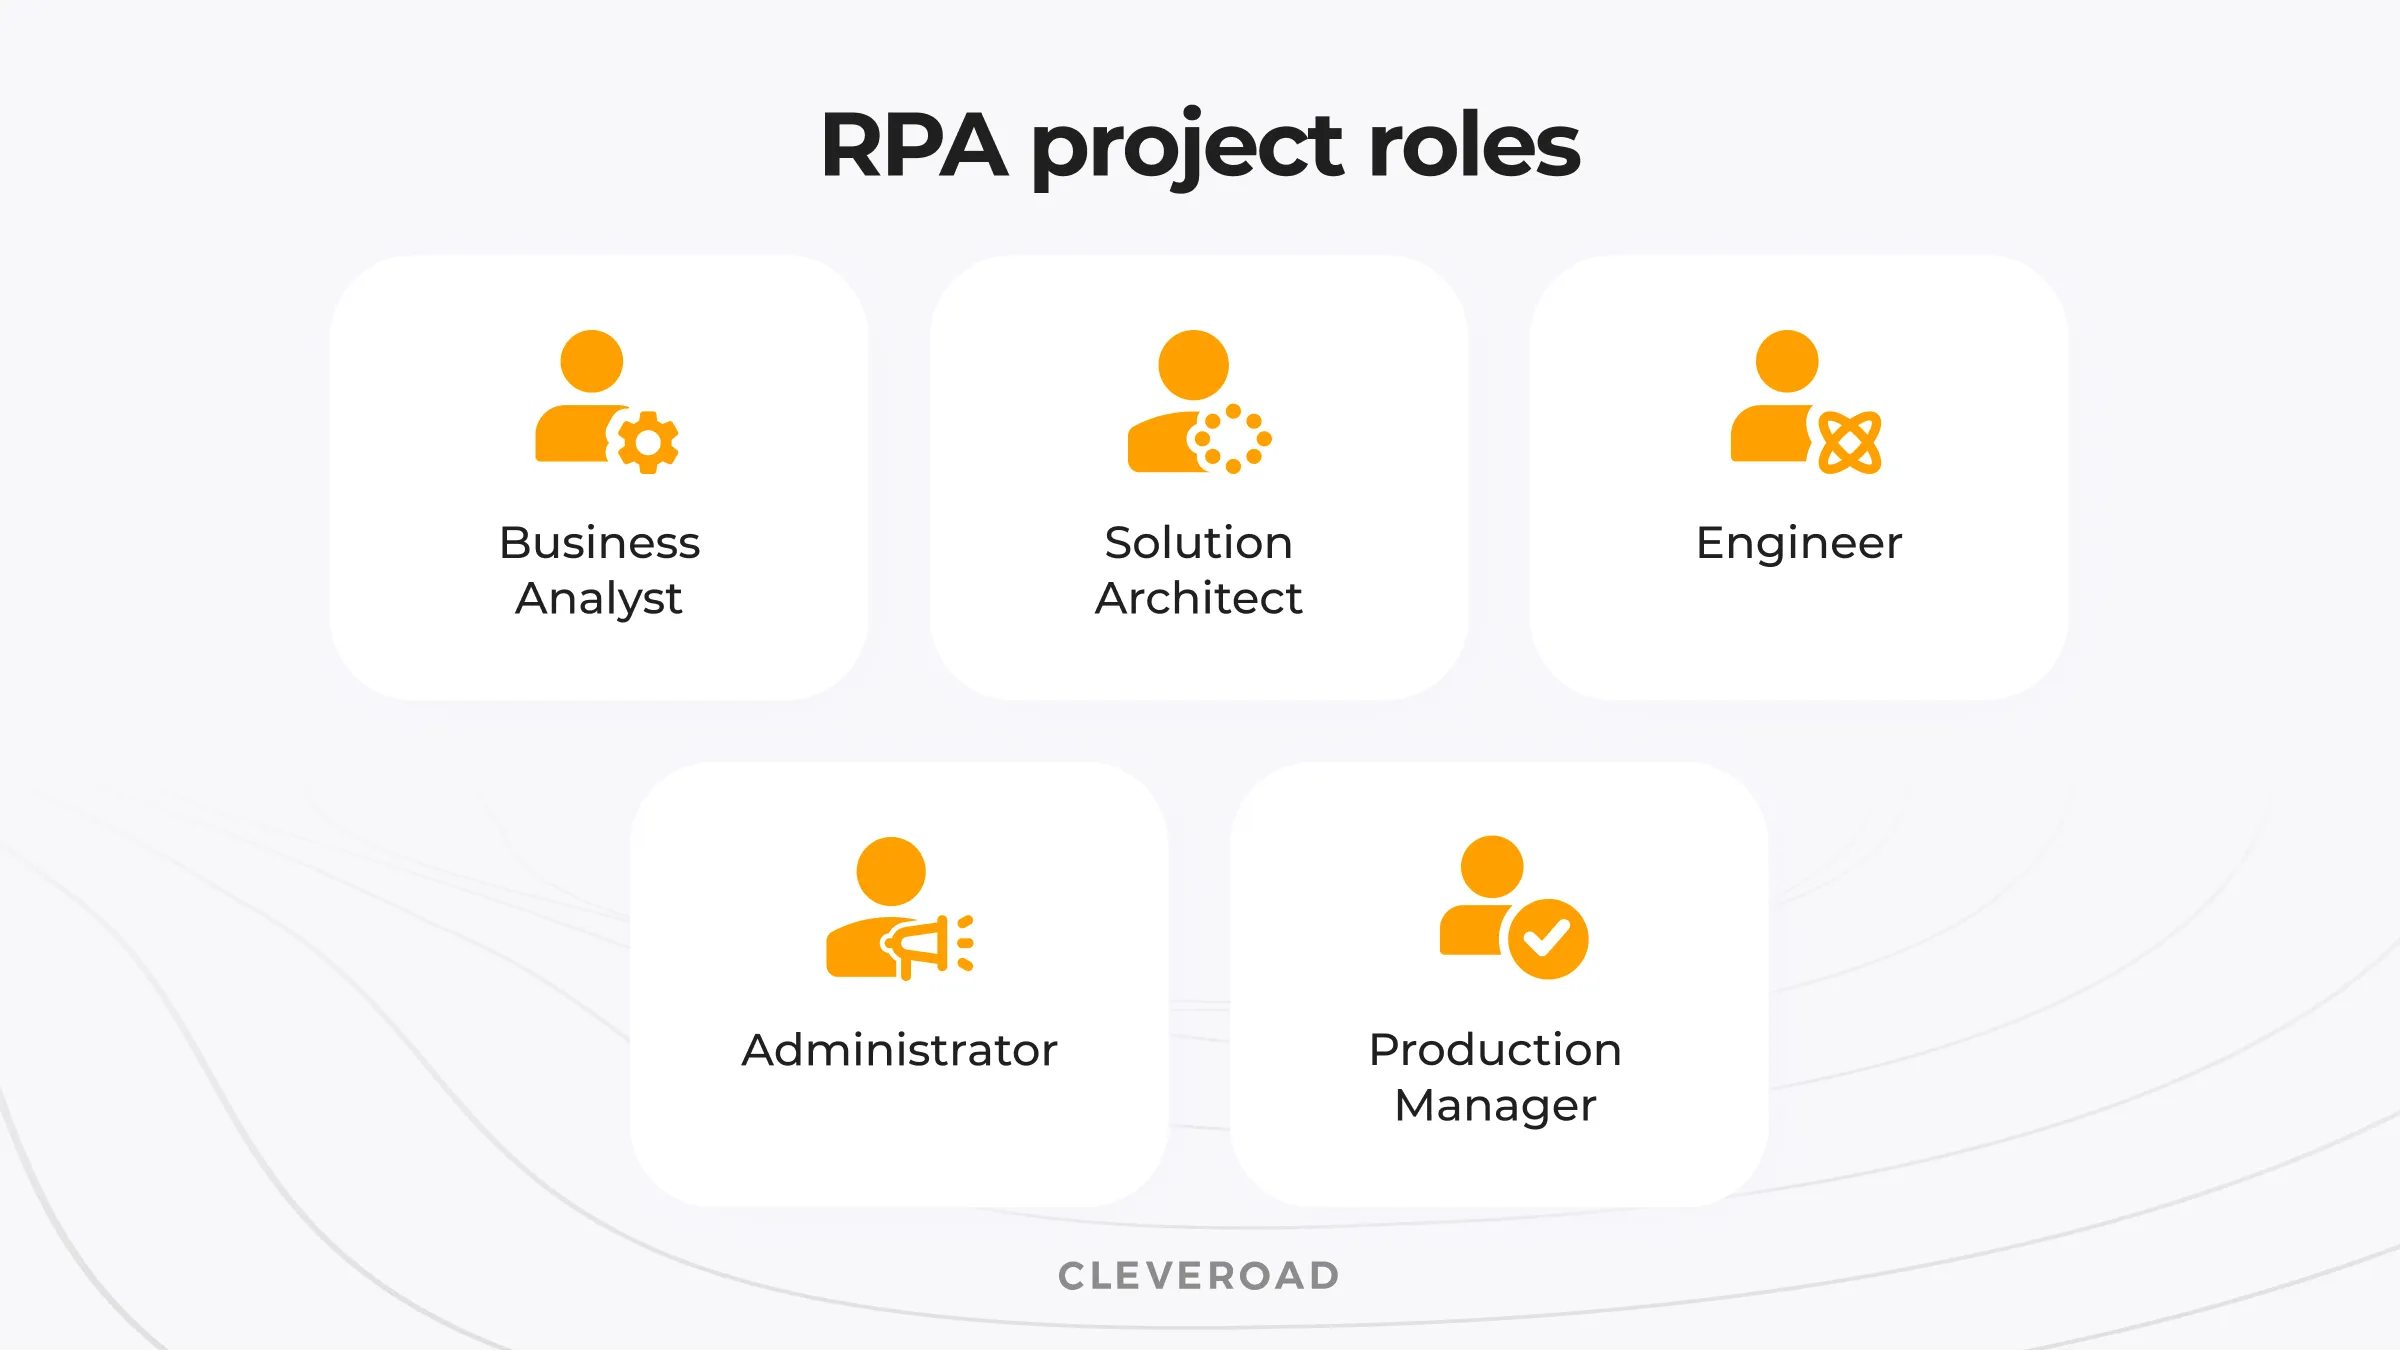 RPA project roles